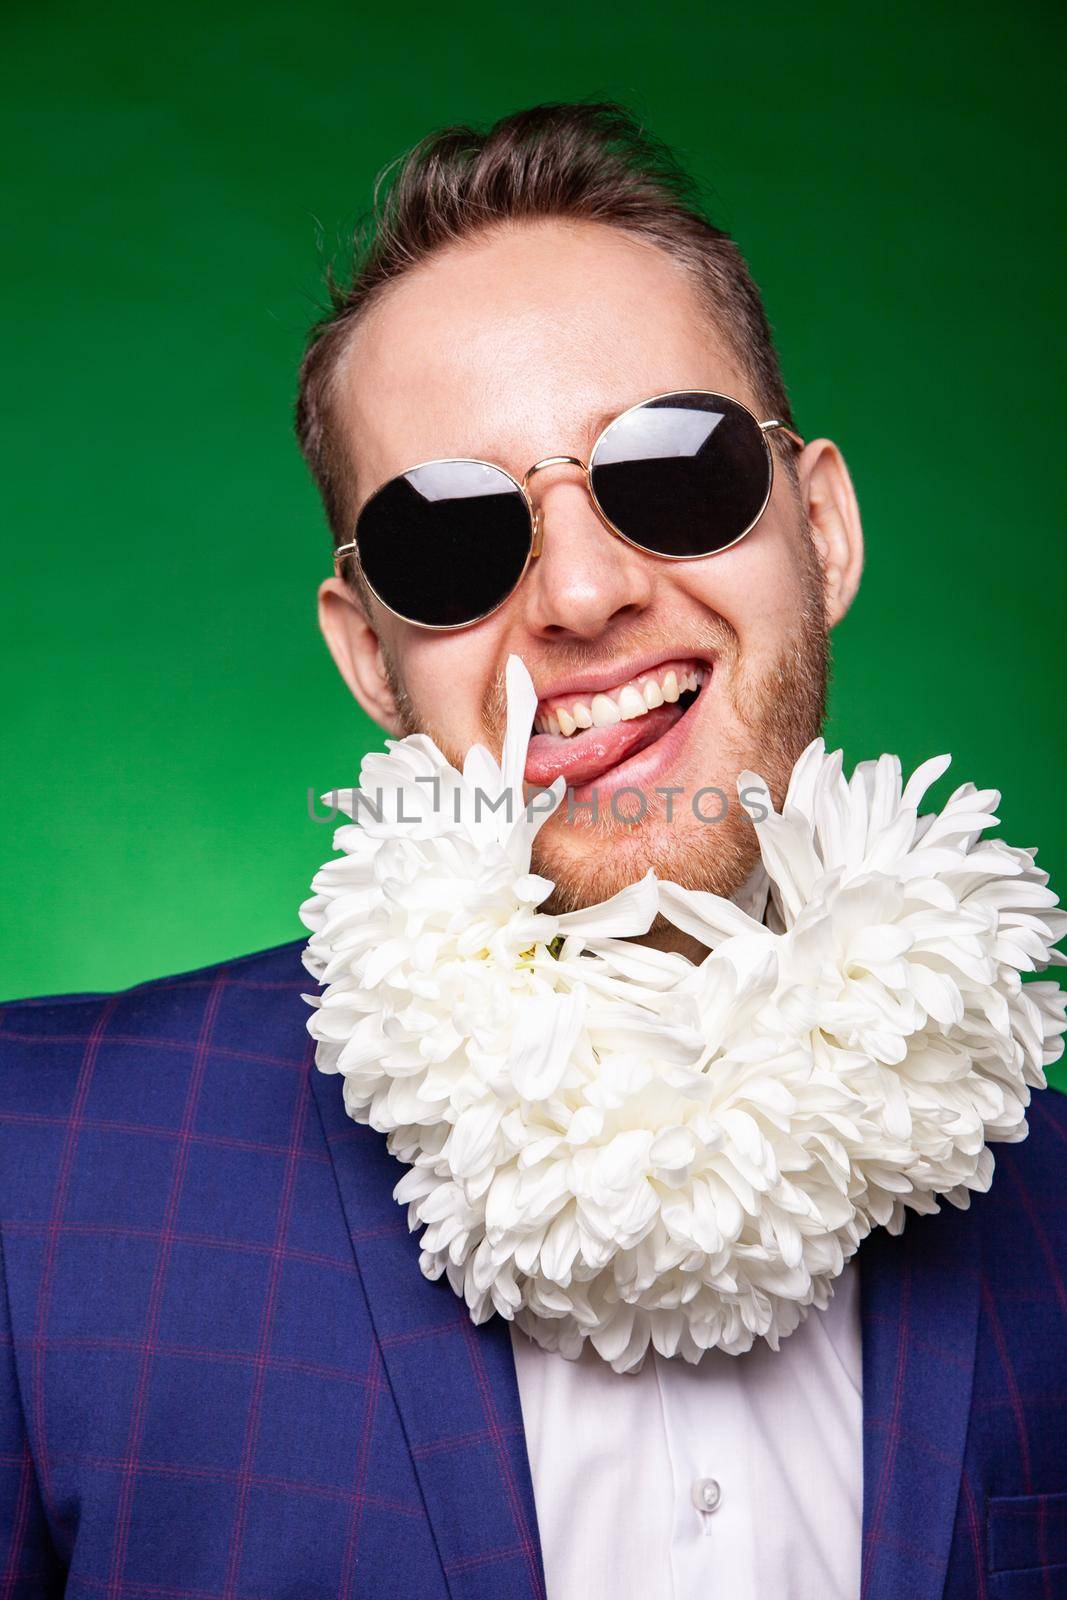 Funny male in suit and sunglasses licking petal of flowers while having fun in studio on green background and looking at camera